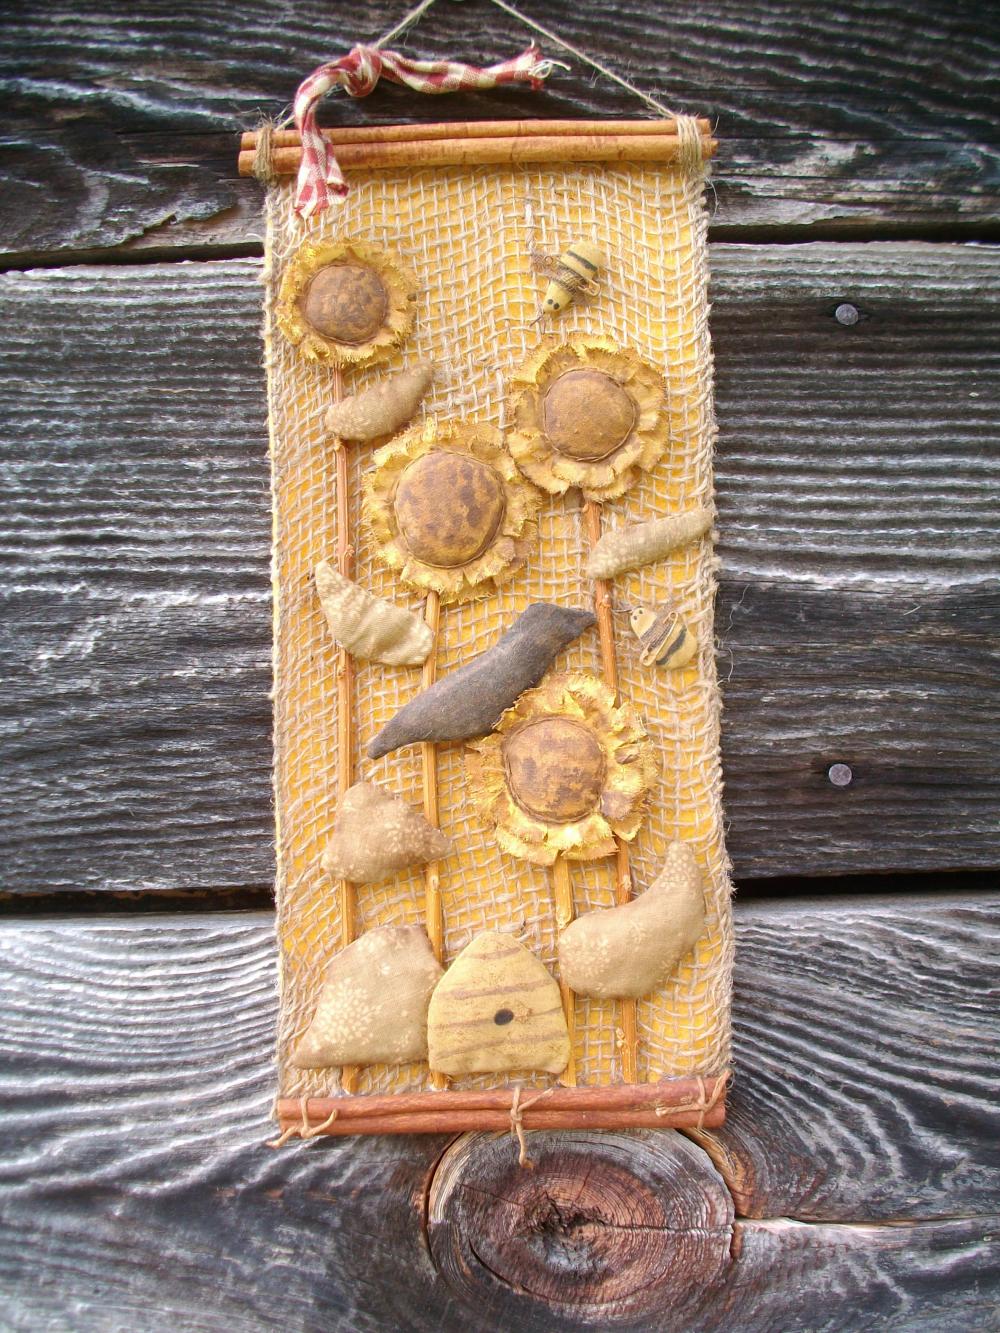 Primitive Burlap Wall Hanging - Sunflowers, Bees Skep And Crow - Cinnamon Stick And Jute Hanger